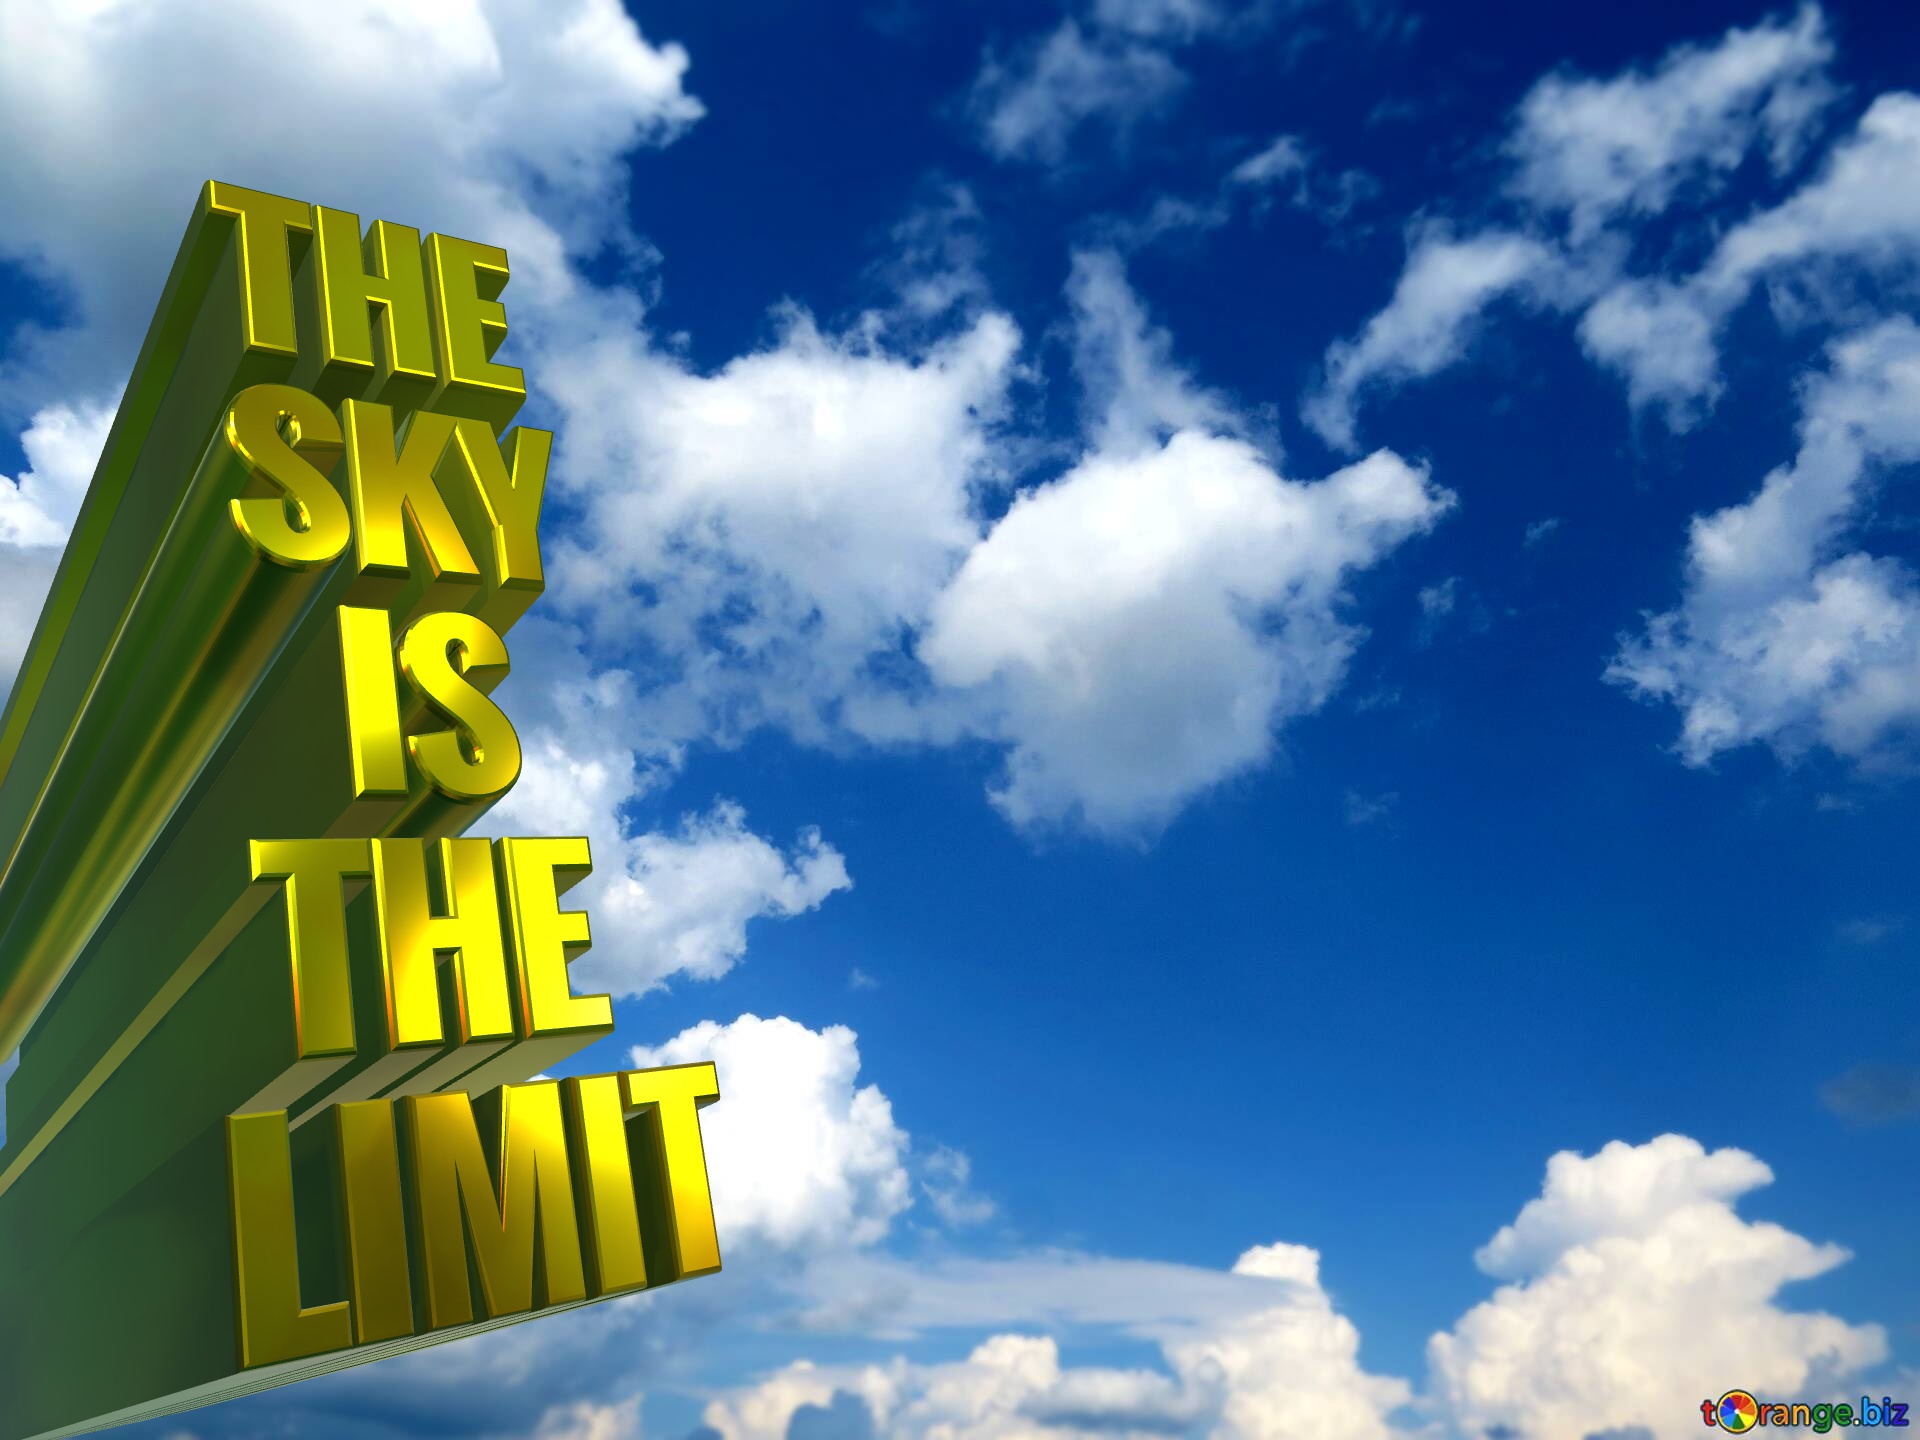 THE SKY IS THE LIMIT clear sky background №0